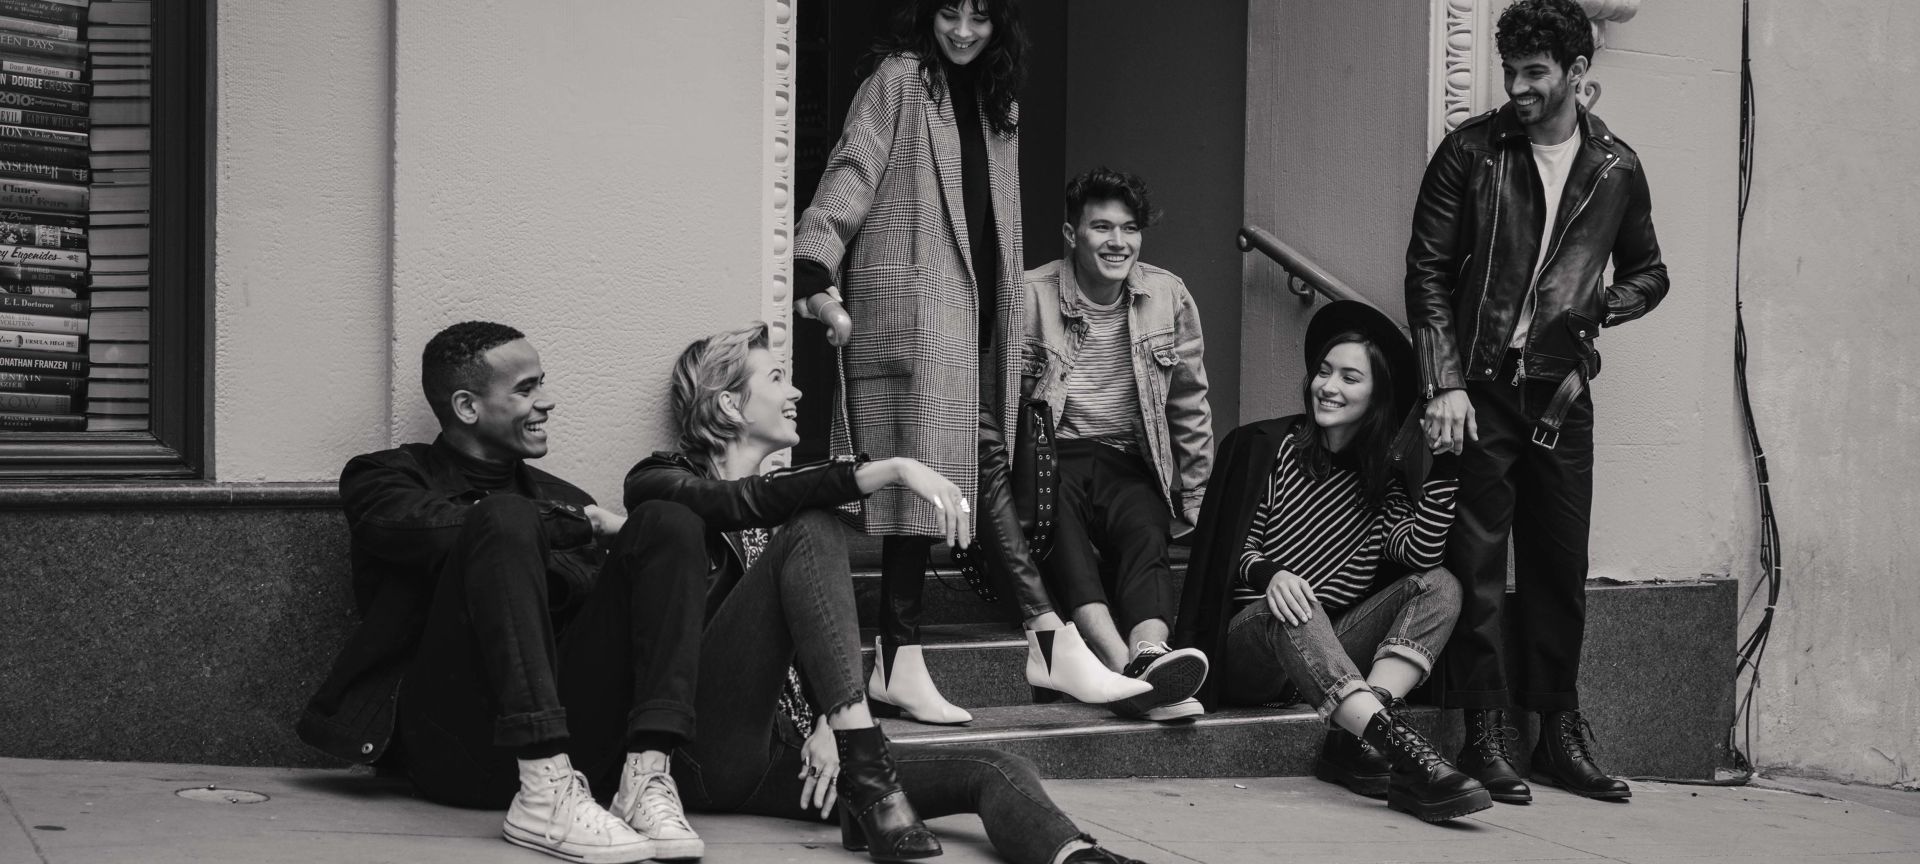 A Group Of People Sitting On The Side Of A Building